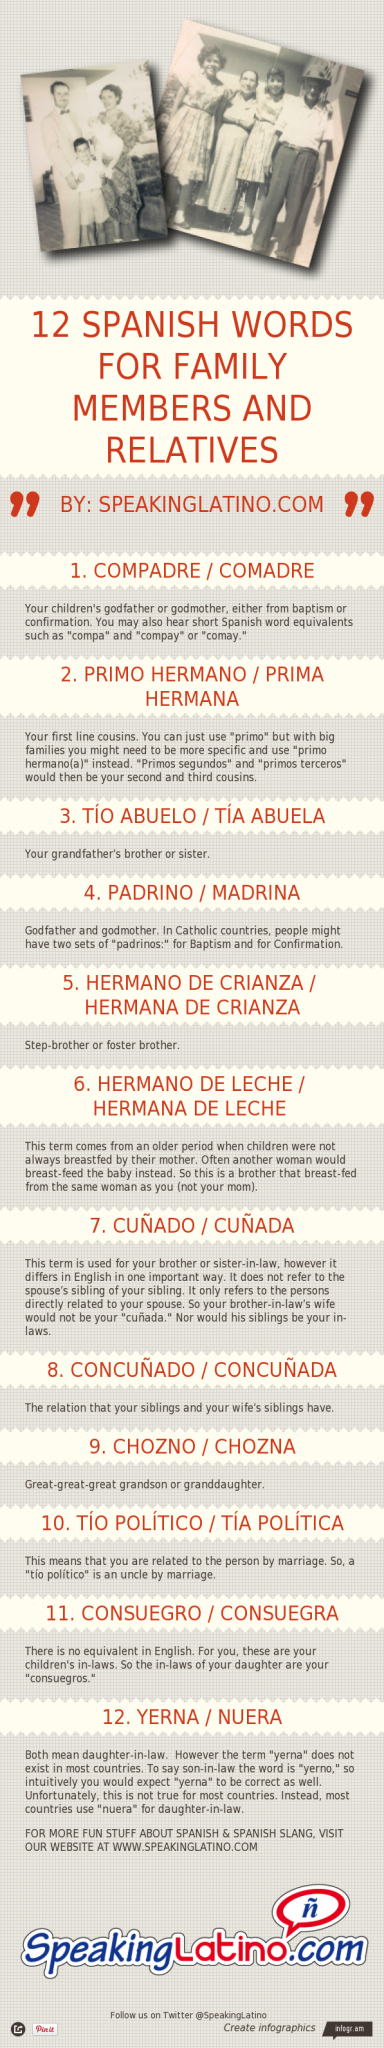 Infographic: Comay, Yerna, Chozno & Other Spanish Words for Family Members and Relatives